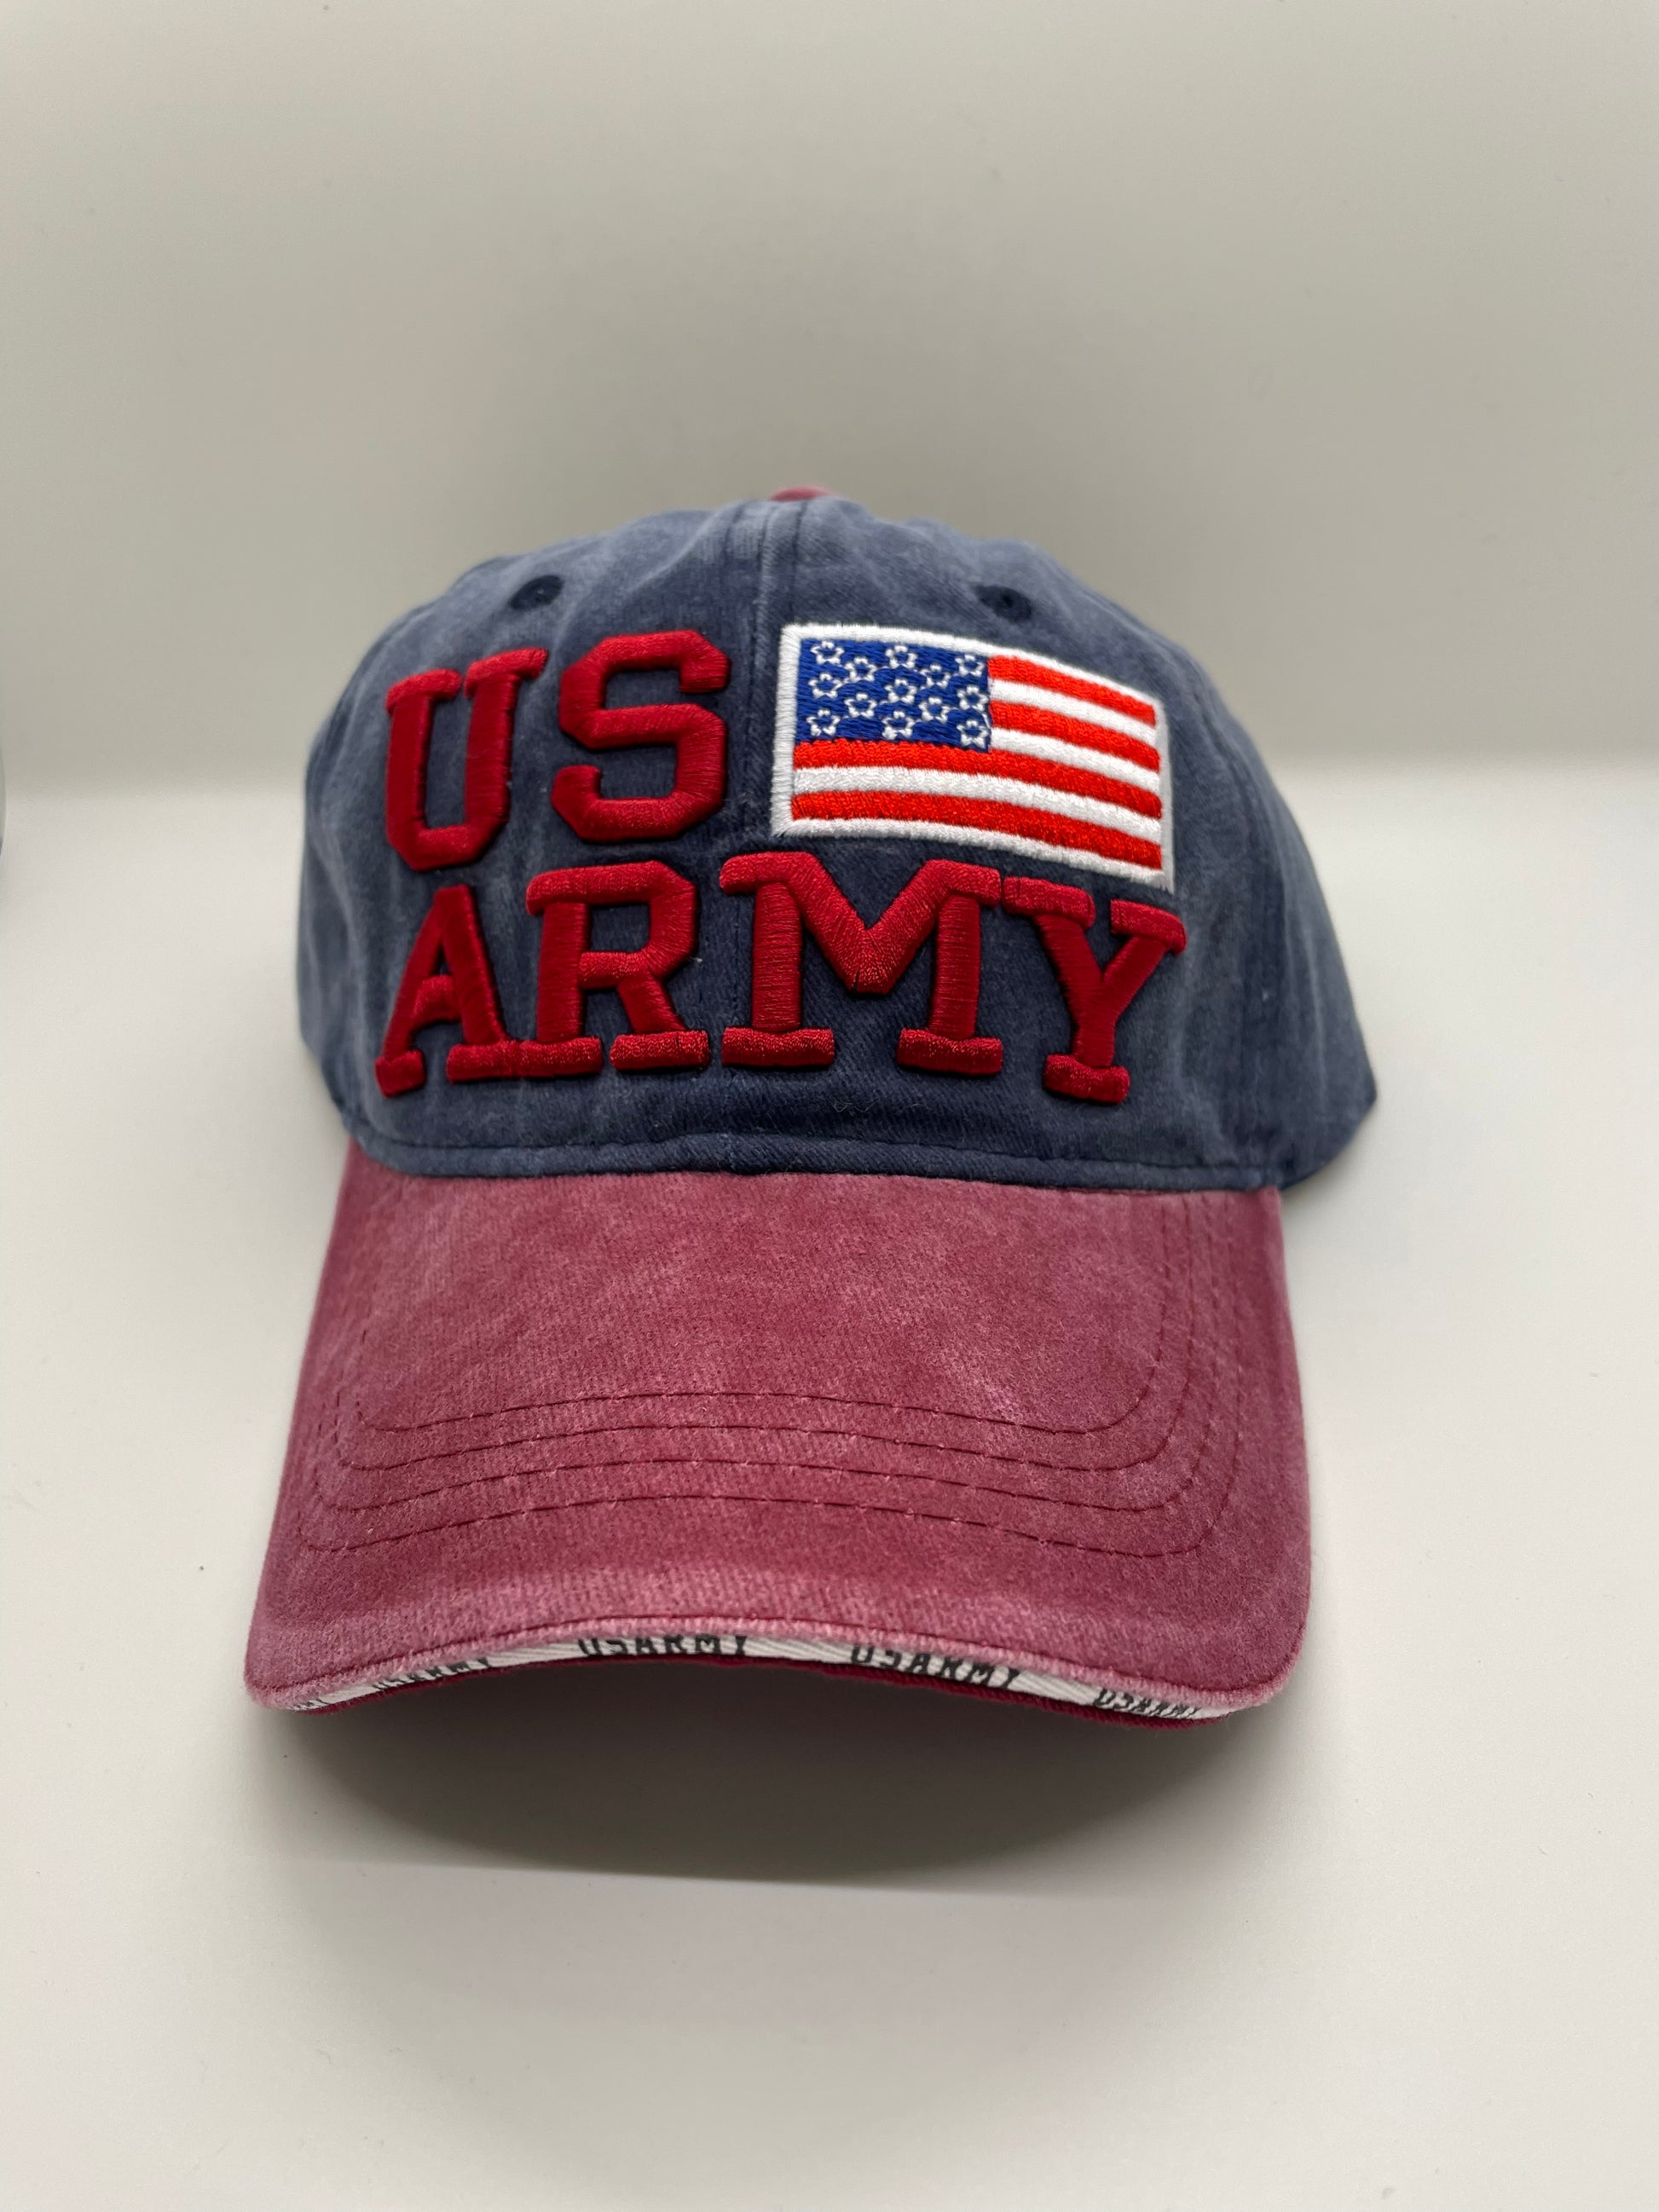 "Gray US Army hat with a ribbed knit texture and a buckle closure"